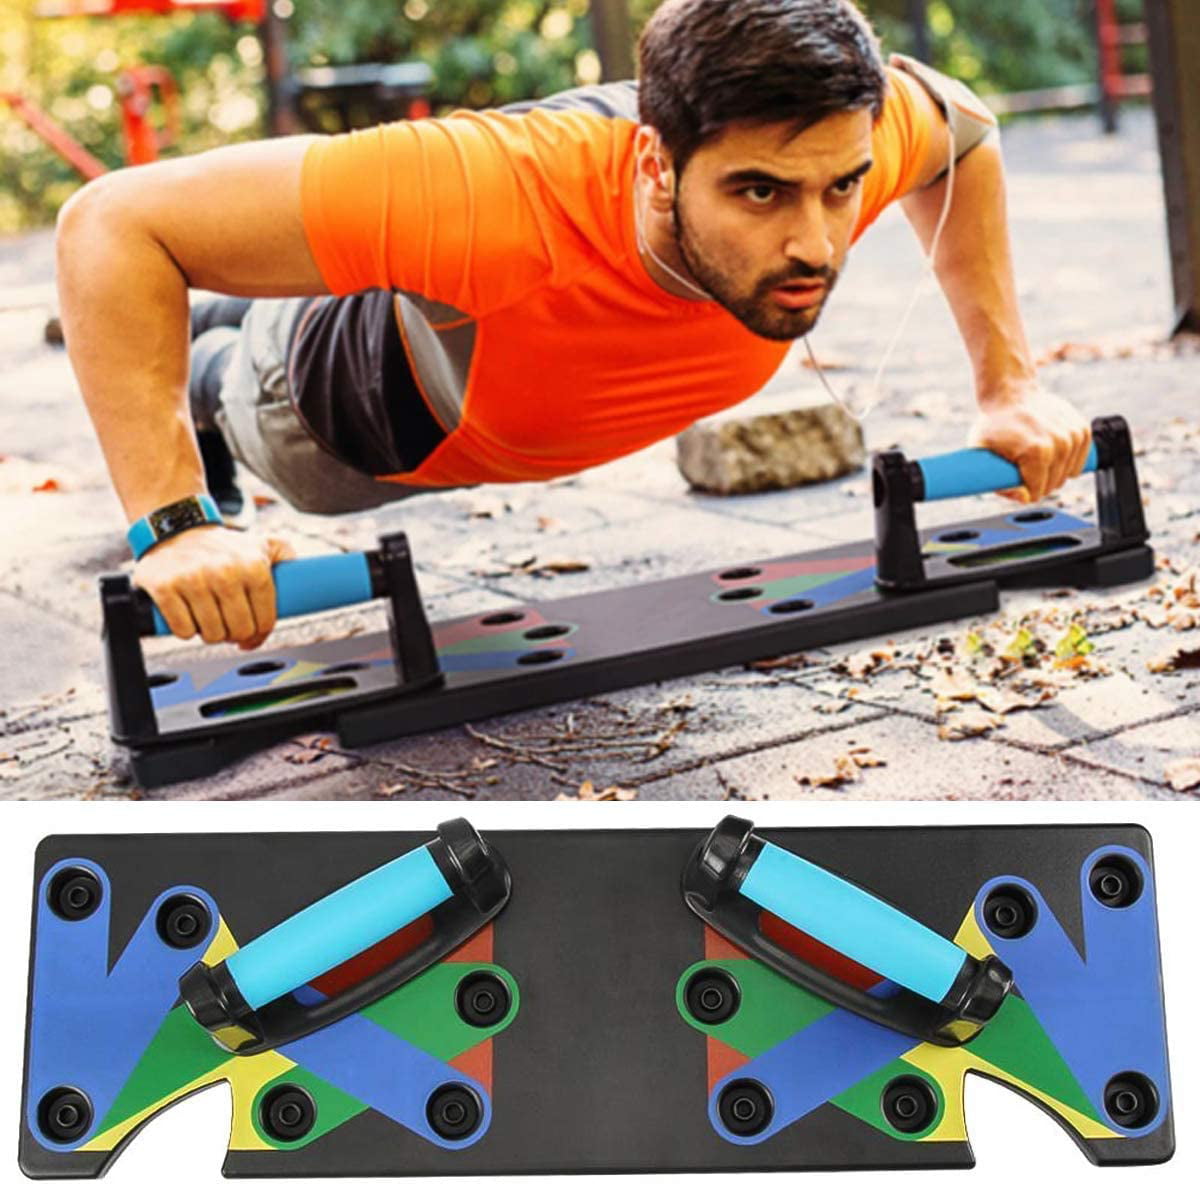 Details about   Sit-up Bars Push up stands Workout Home fit Press Up Non-Slip Handles Fitness 